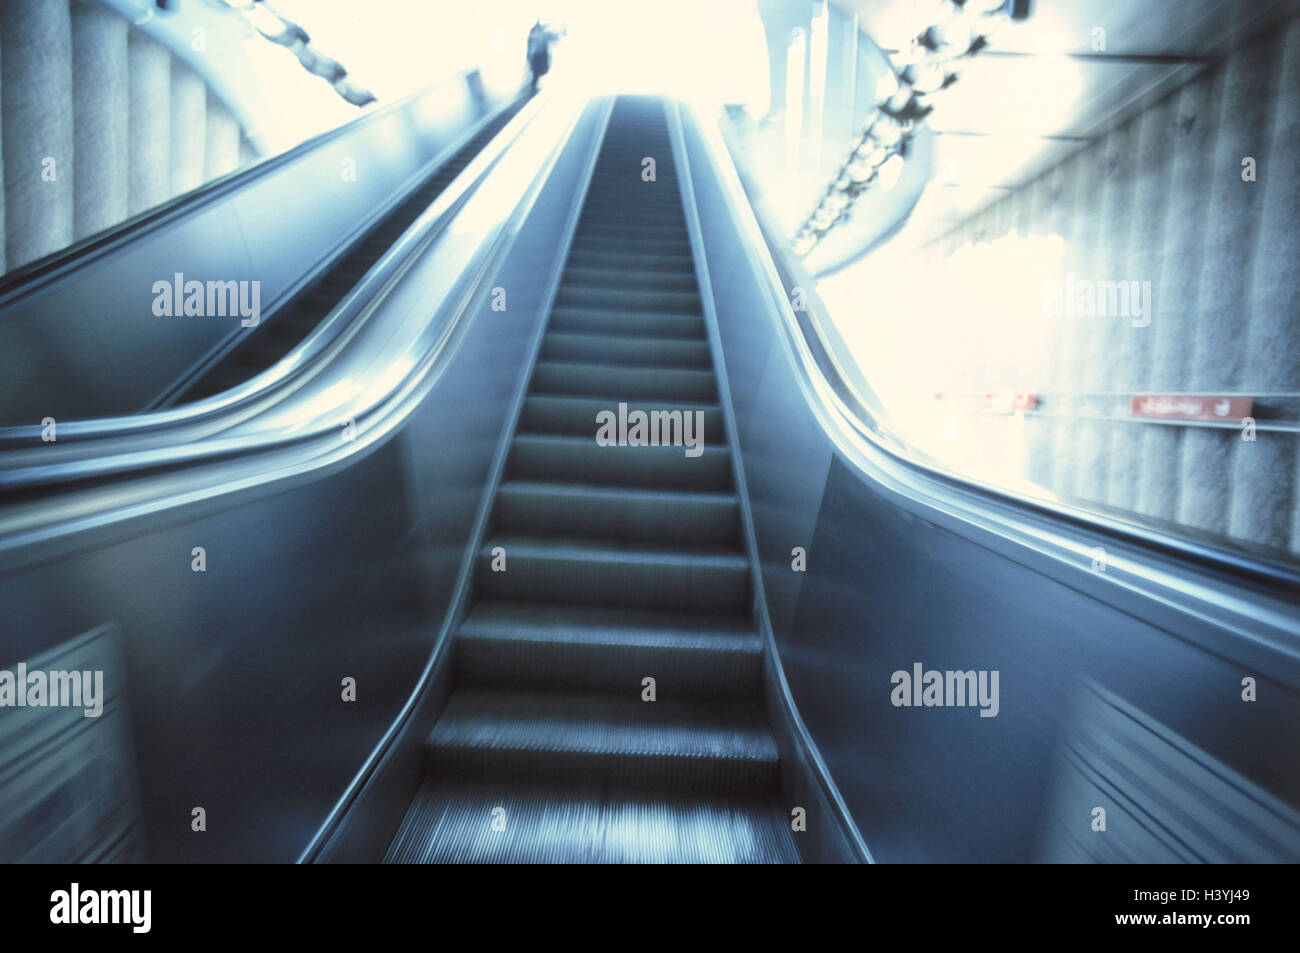 Subway station, escalator, metro, steady sponsor, escalator, stairs, rising, exit, transportation human beings, blank, conception, promotion, success, future, career, business, ray hope, light, back light, destination, loneliness, abandonment Stock Photo